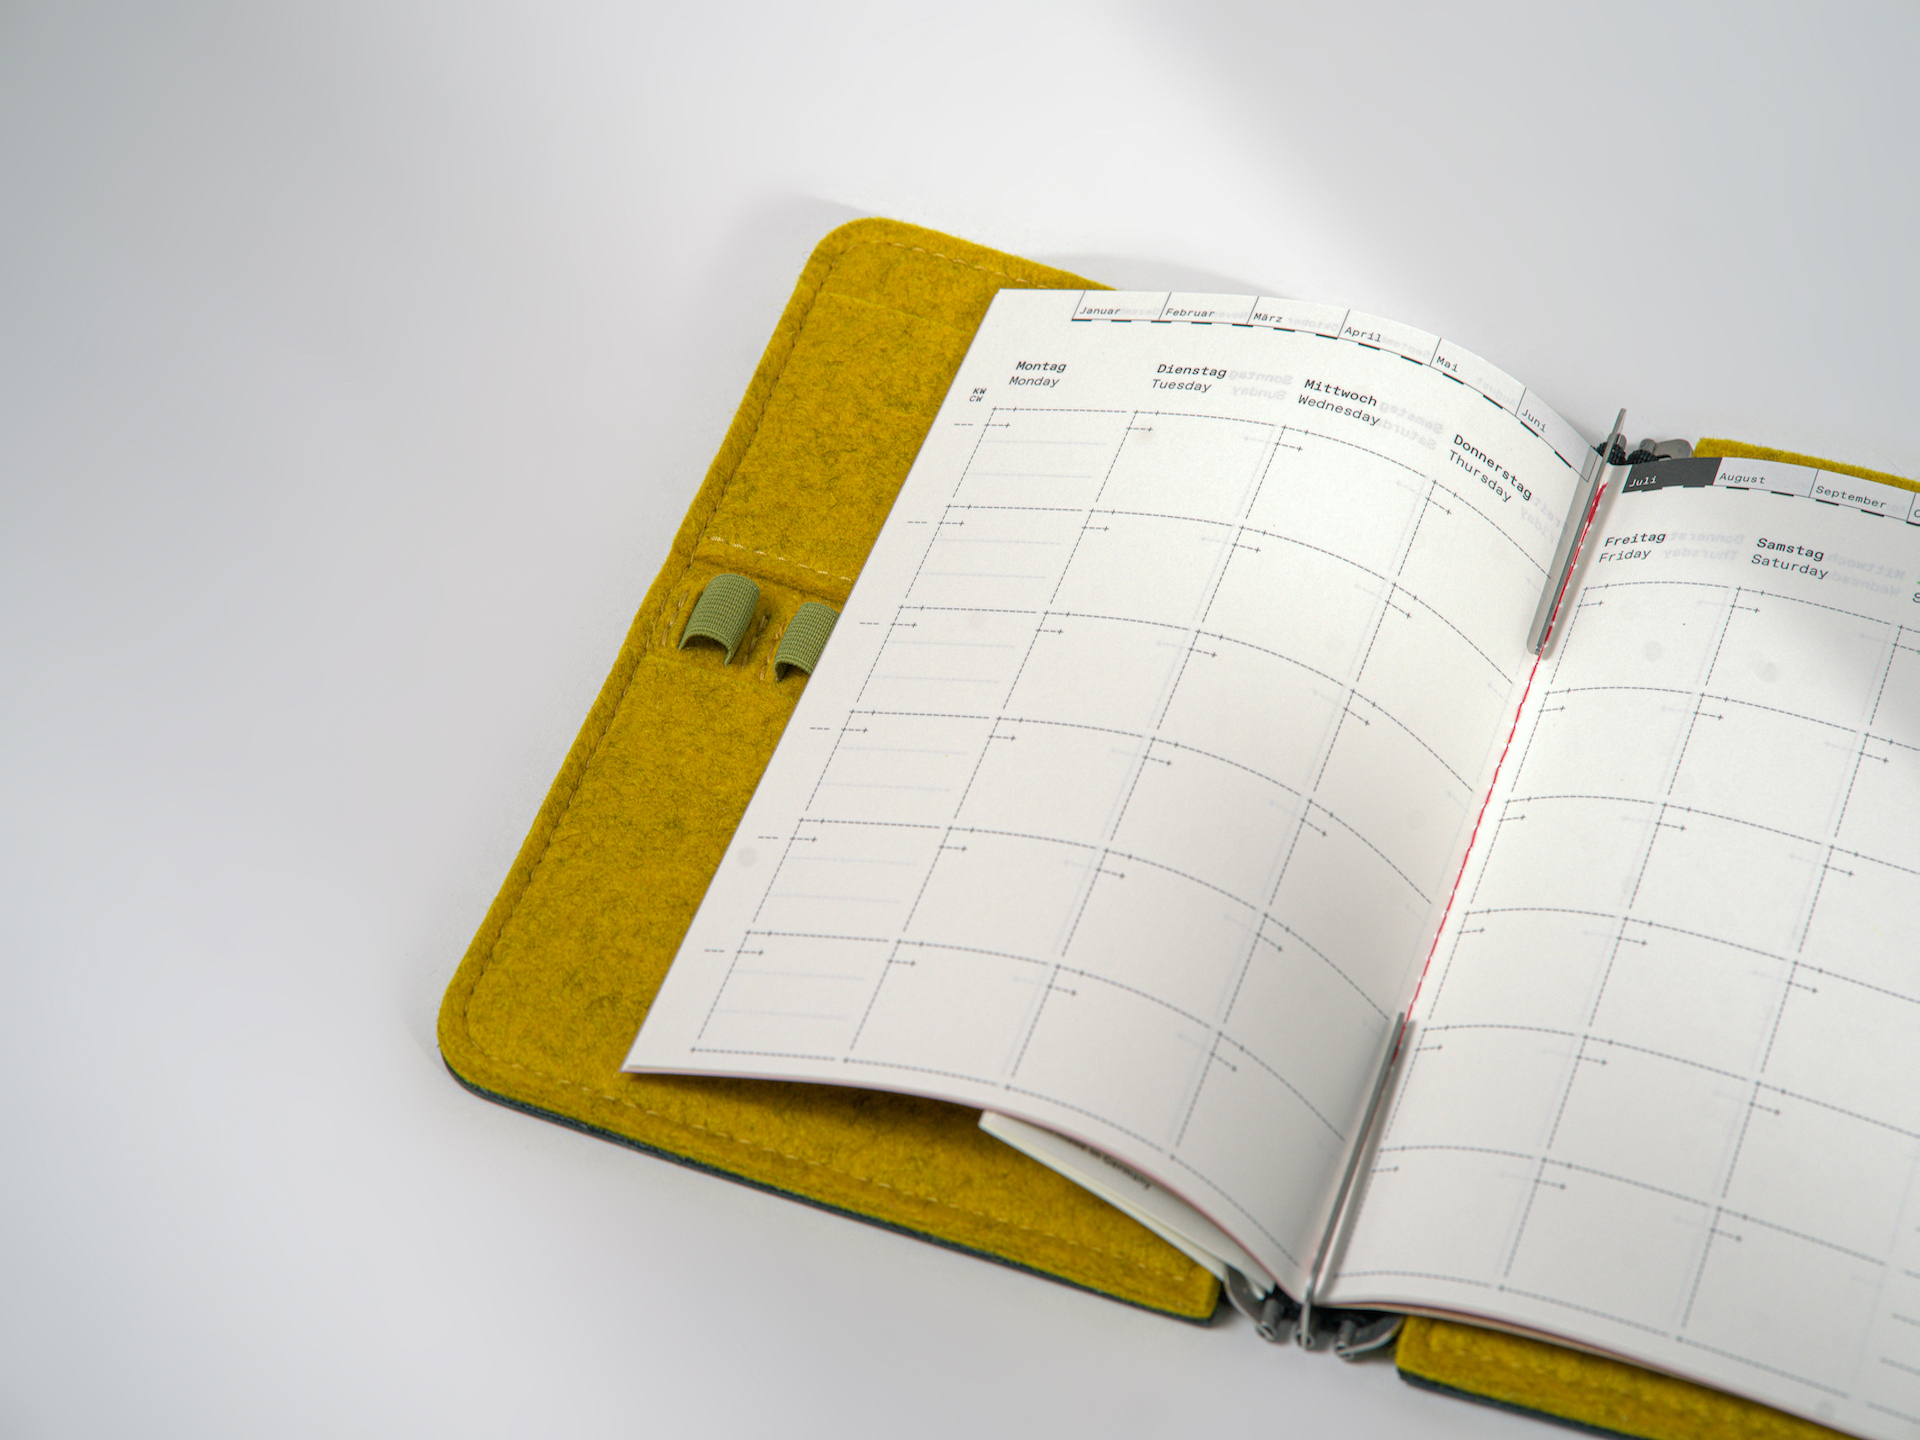 Undated monthly planner in M size (14 × 20 cm) for A5, sewn with red thread, featuring a sturdy cover made from recycled cardboard. 32 pages with colored endpapers.